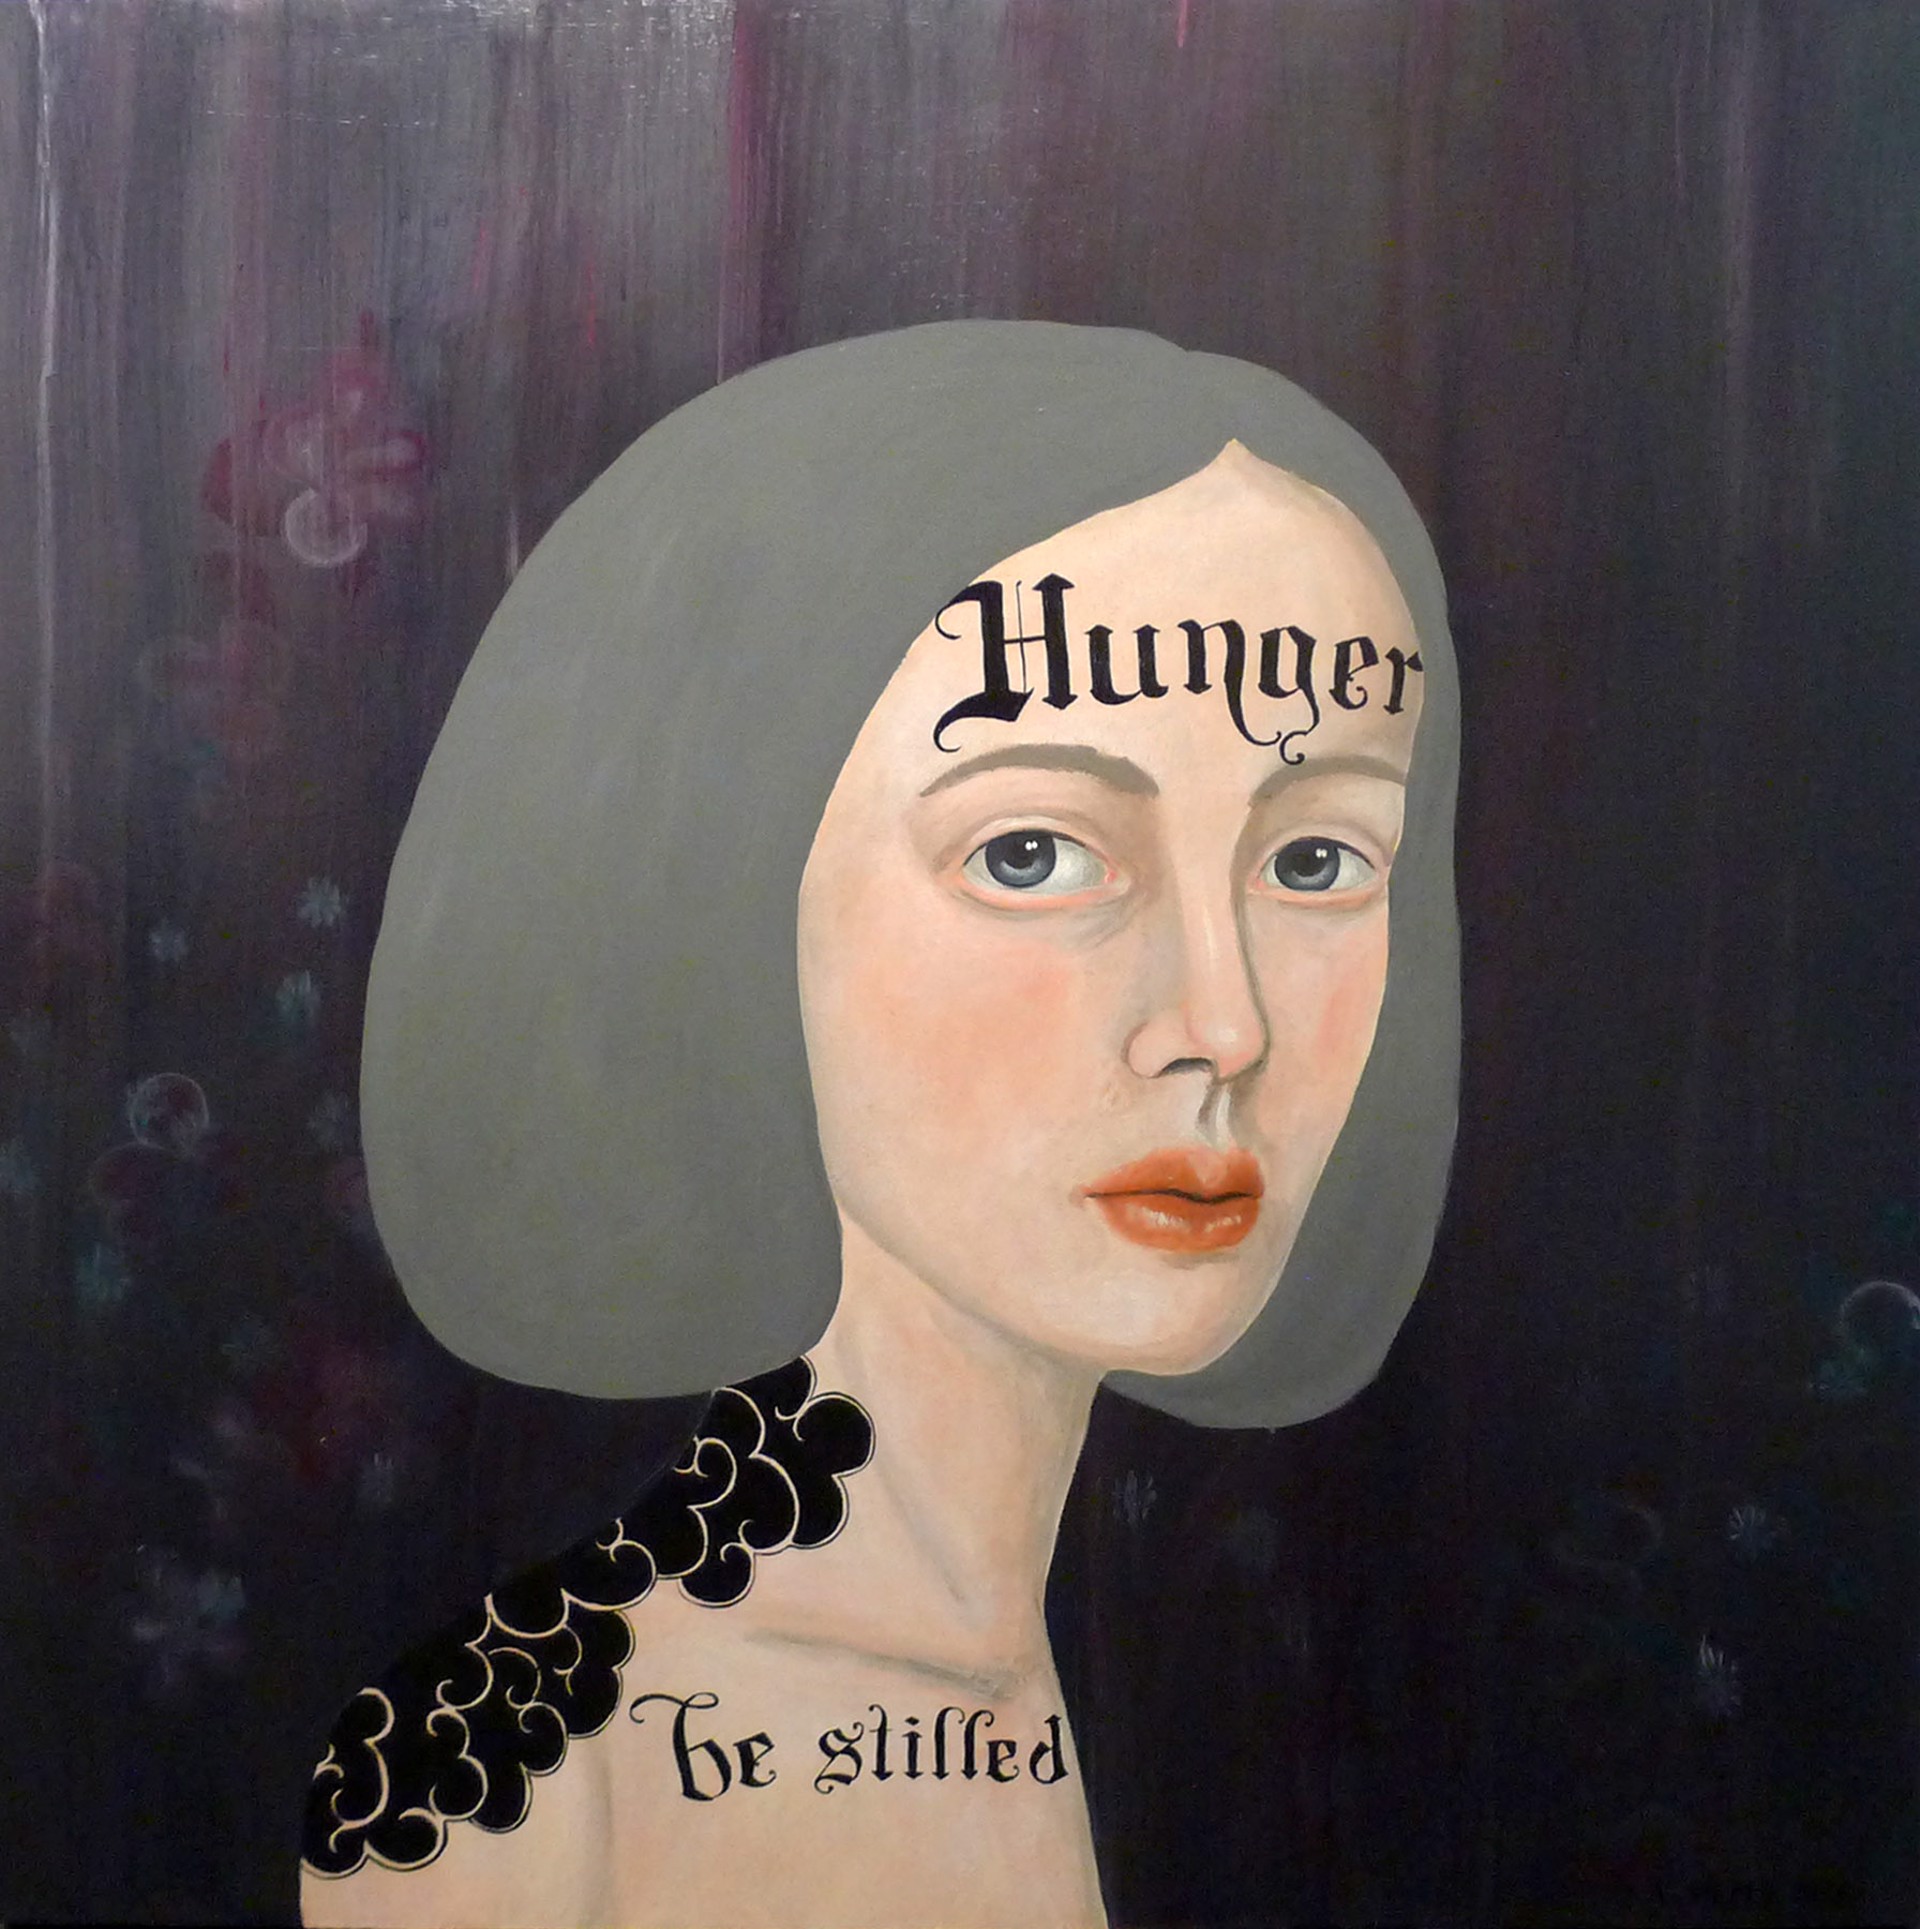 Hunger by Anne Siems